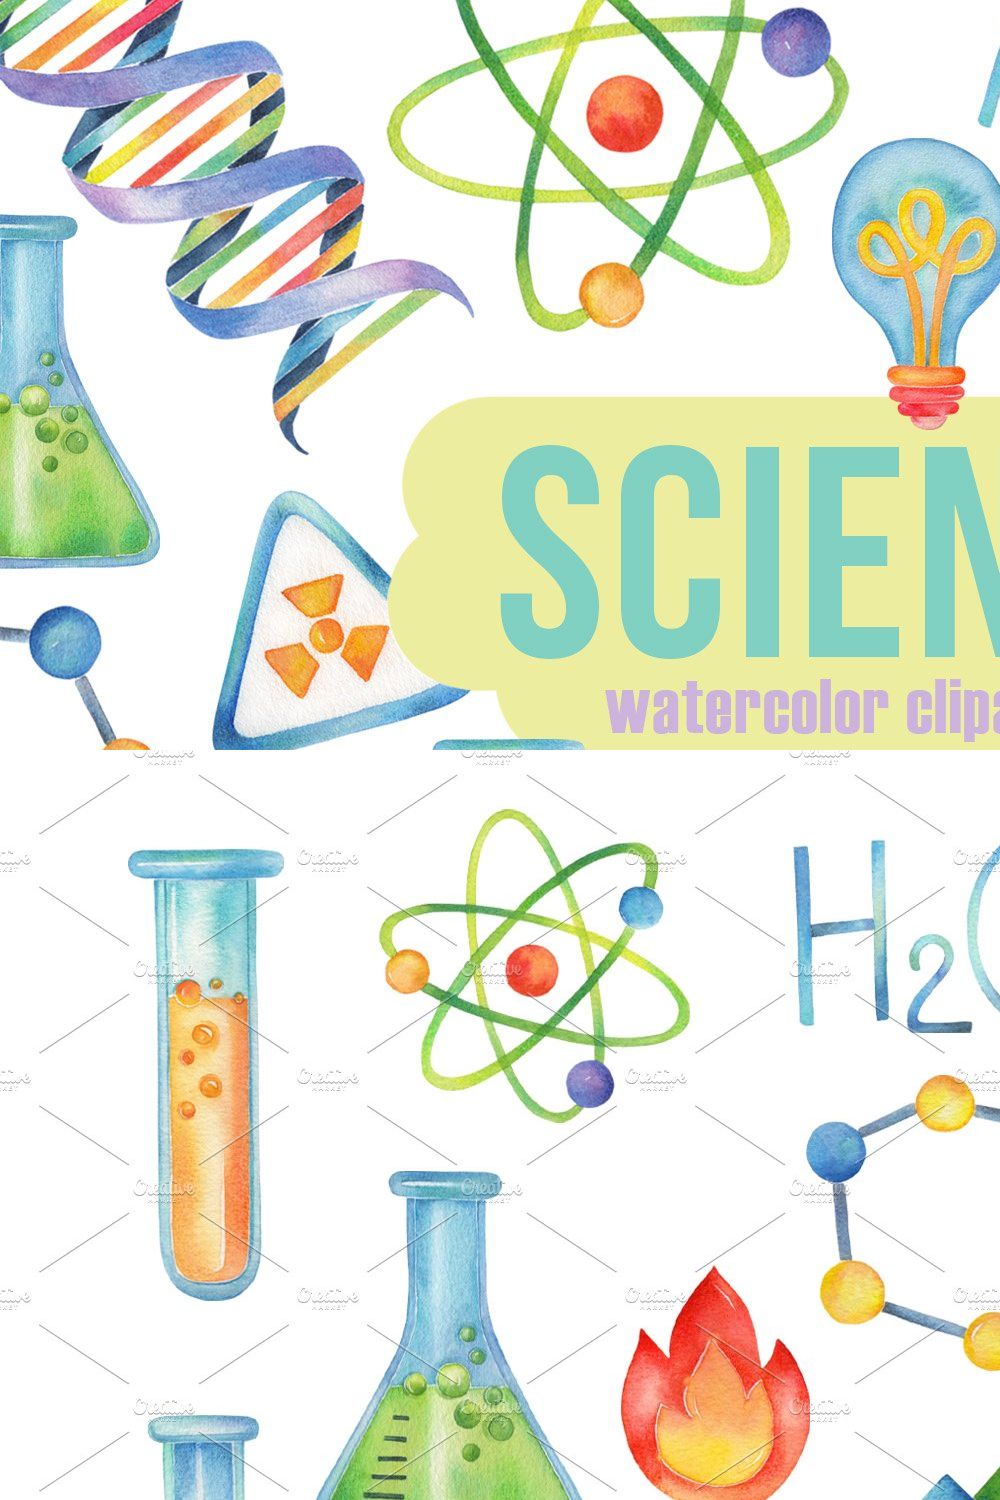 Science watercolor clipart,Chemistry pinterest preview image.